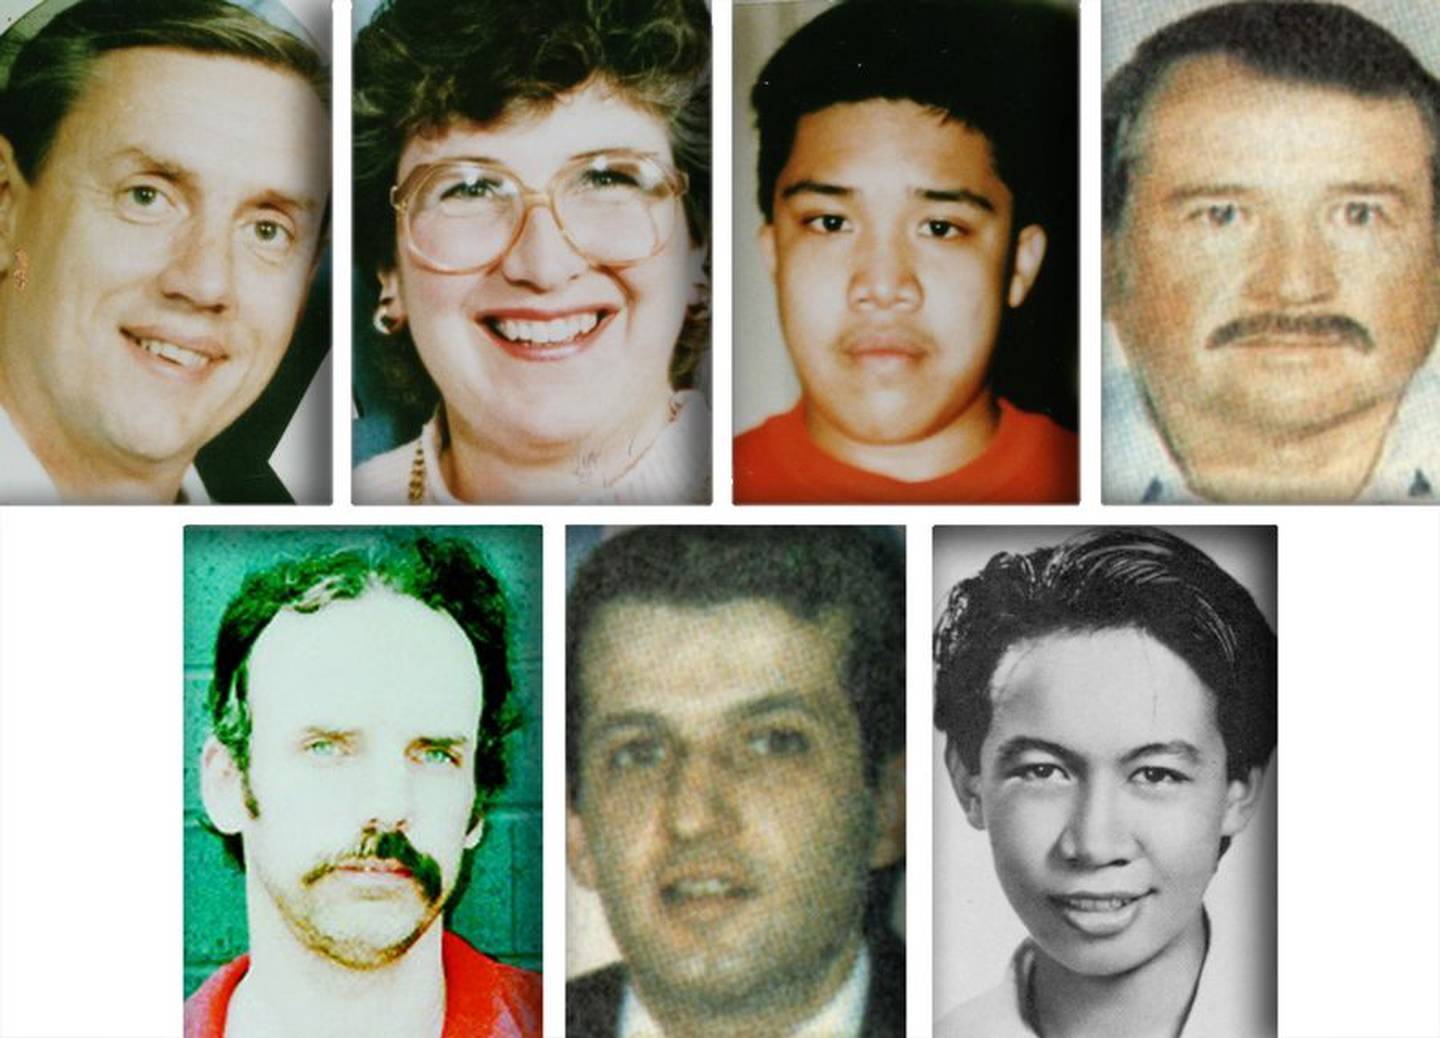 Slain on Jan. 8, 1993, at the Brown's Chicken in Palatine were, top from left, owners Richard and Lynn Ehlenfeldt, and employees Michael Castro, Guadalupe Maldonado and, bottom from left, Thomas Mennes, Marcus Nellsen and Rico Solis.